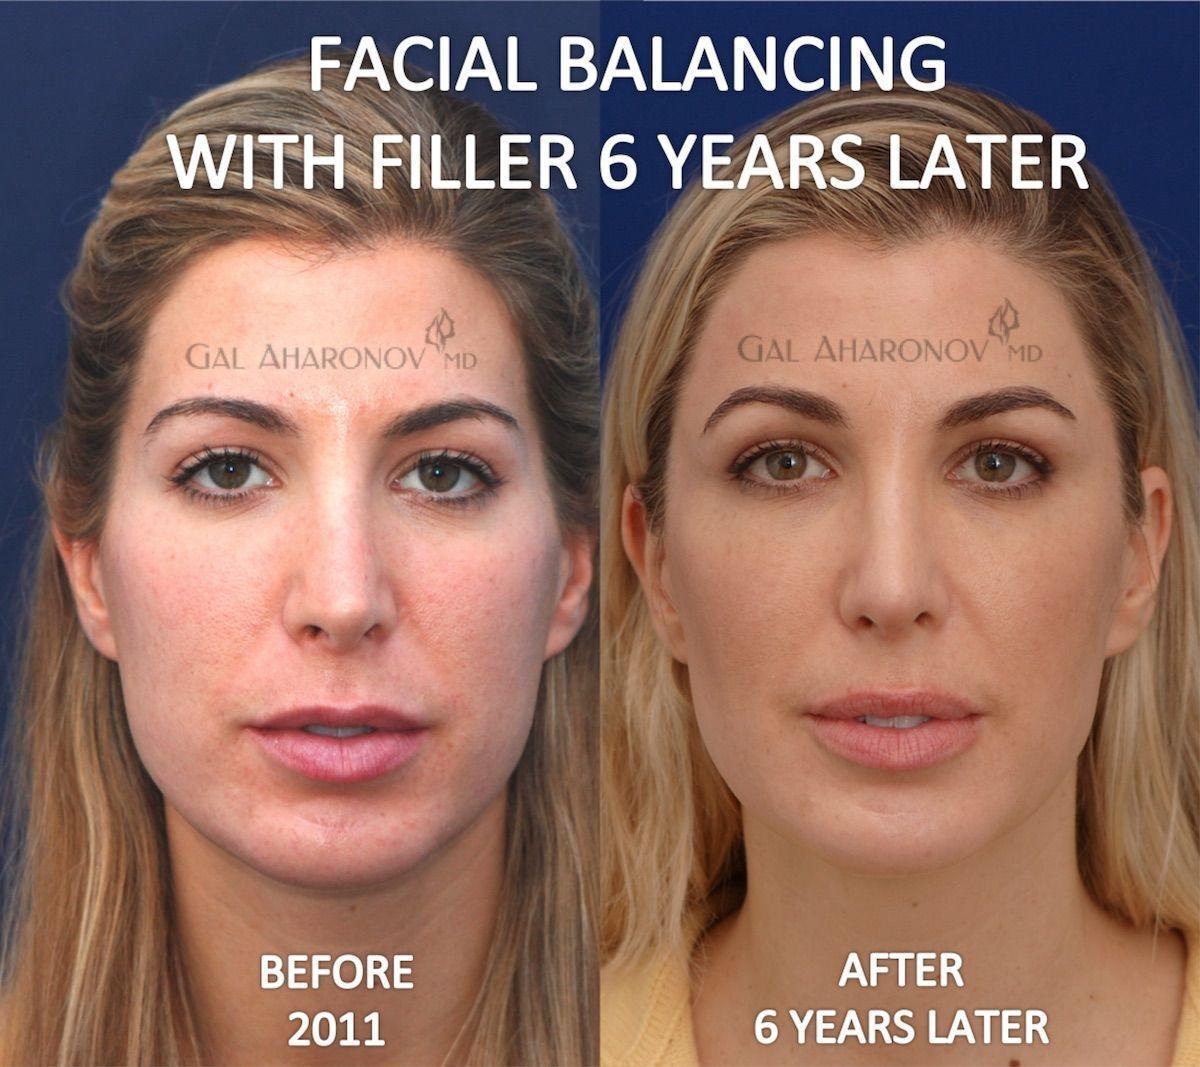 Facial fillers and pictures